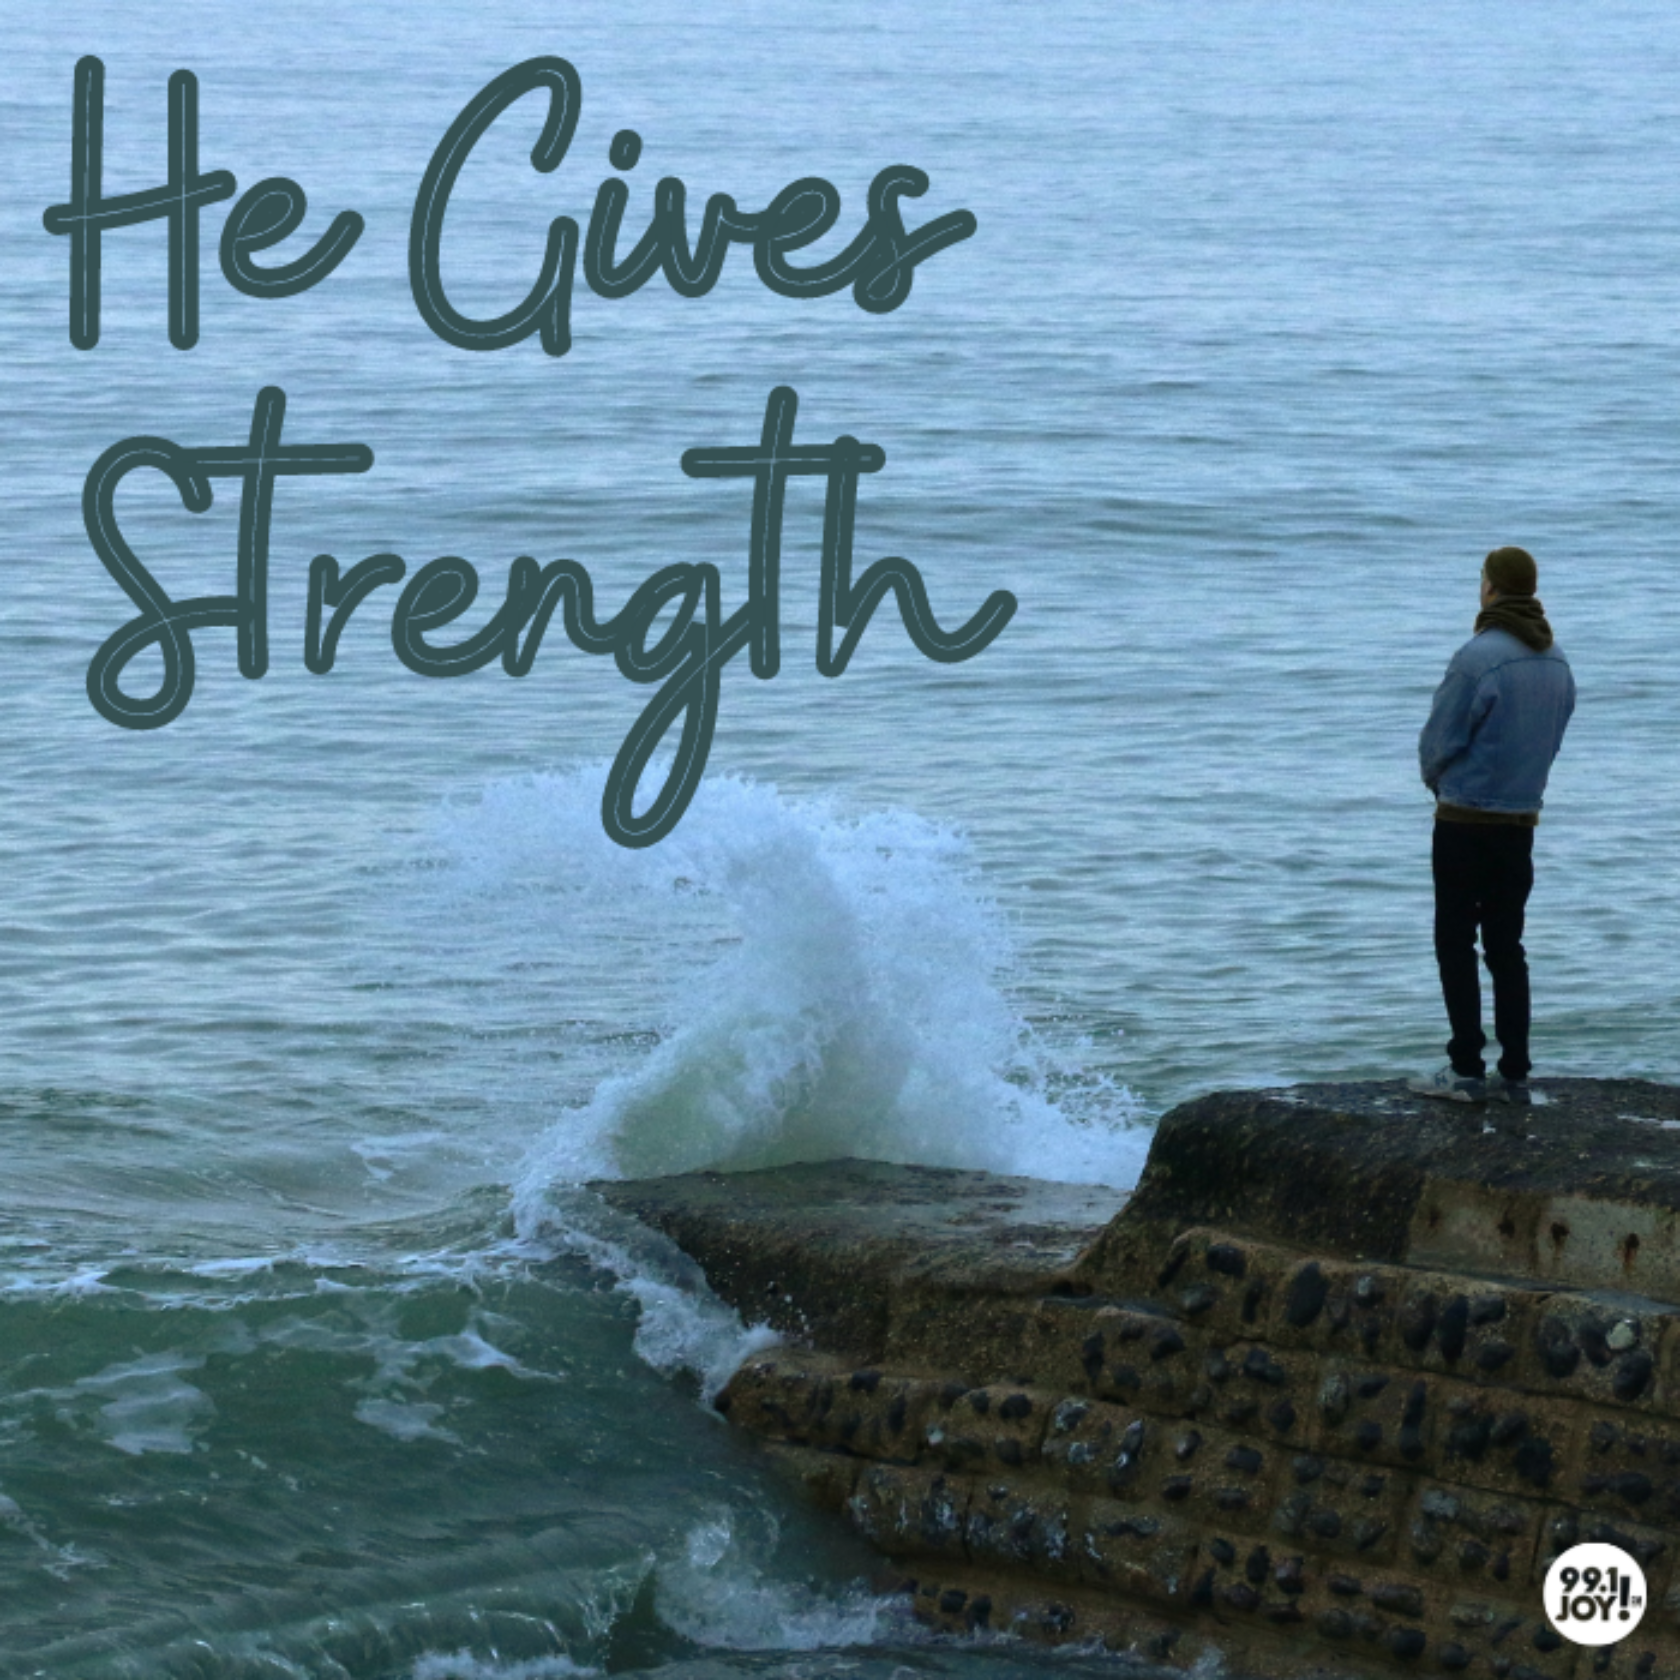 He Gives Strength